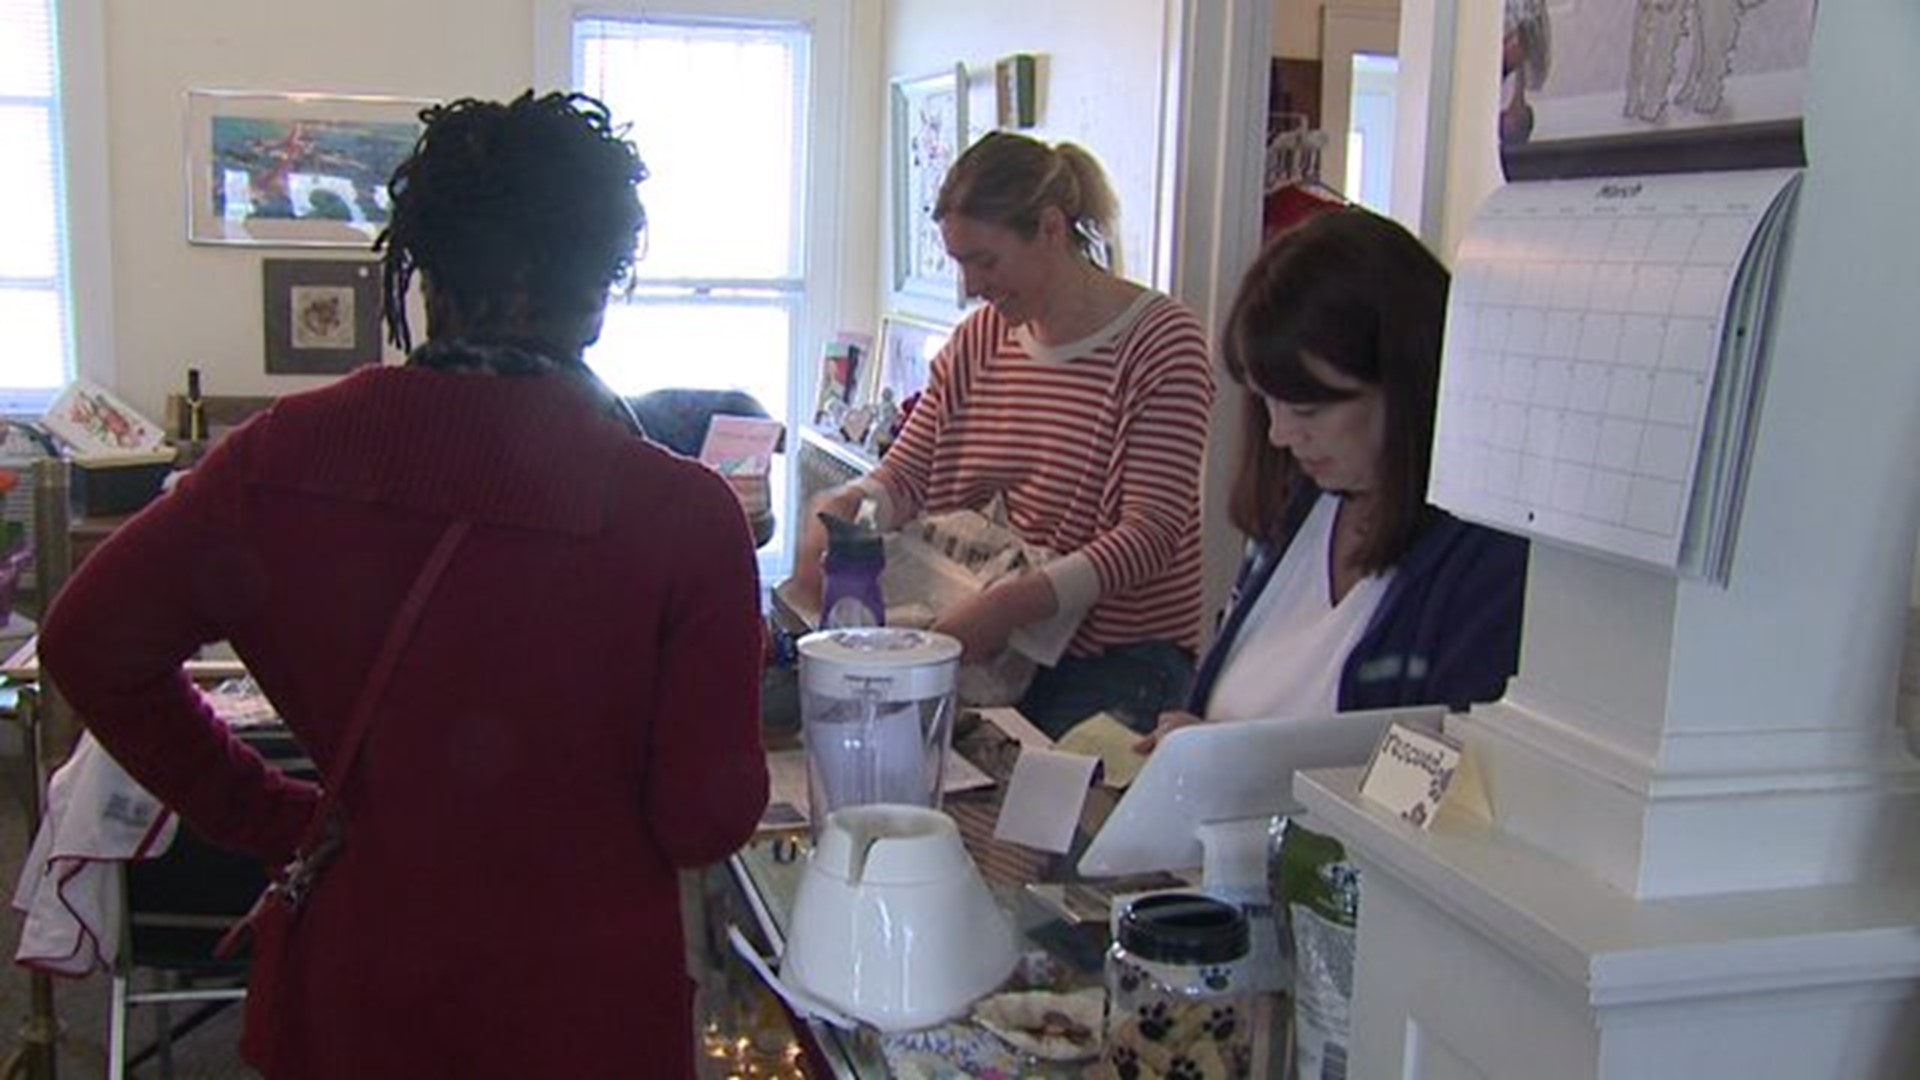 Local business making big impact for pets